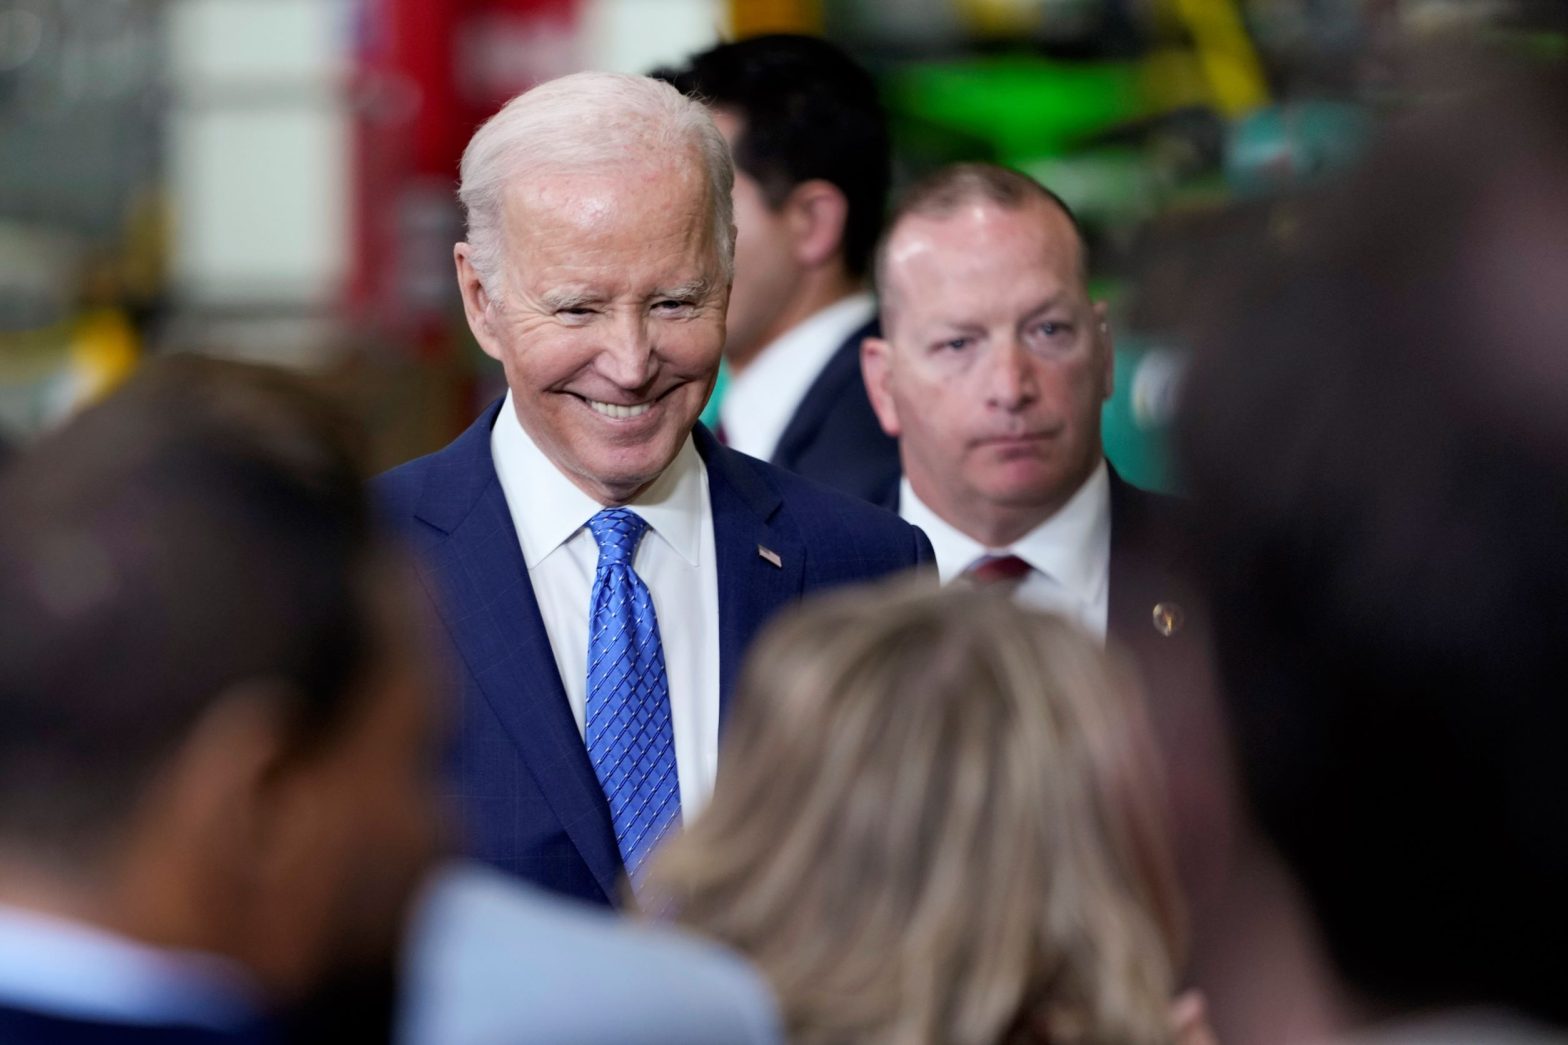 Democratic lawmaker Phillips loaning his campaign $2 mln against Biden